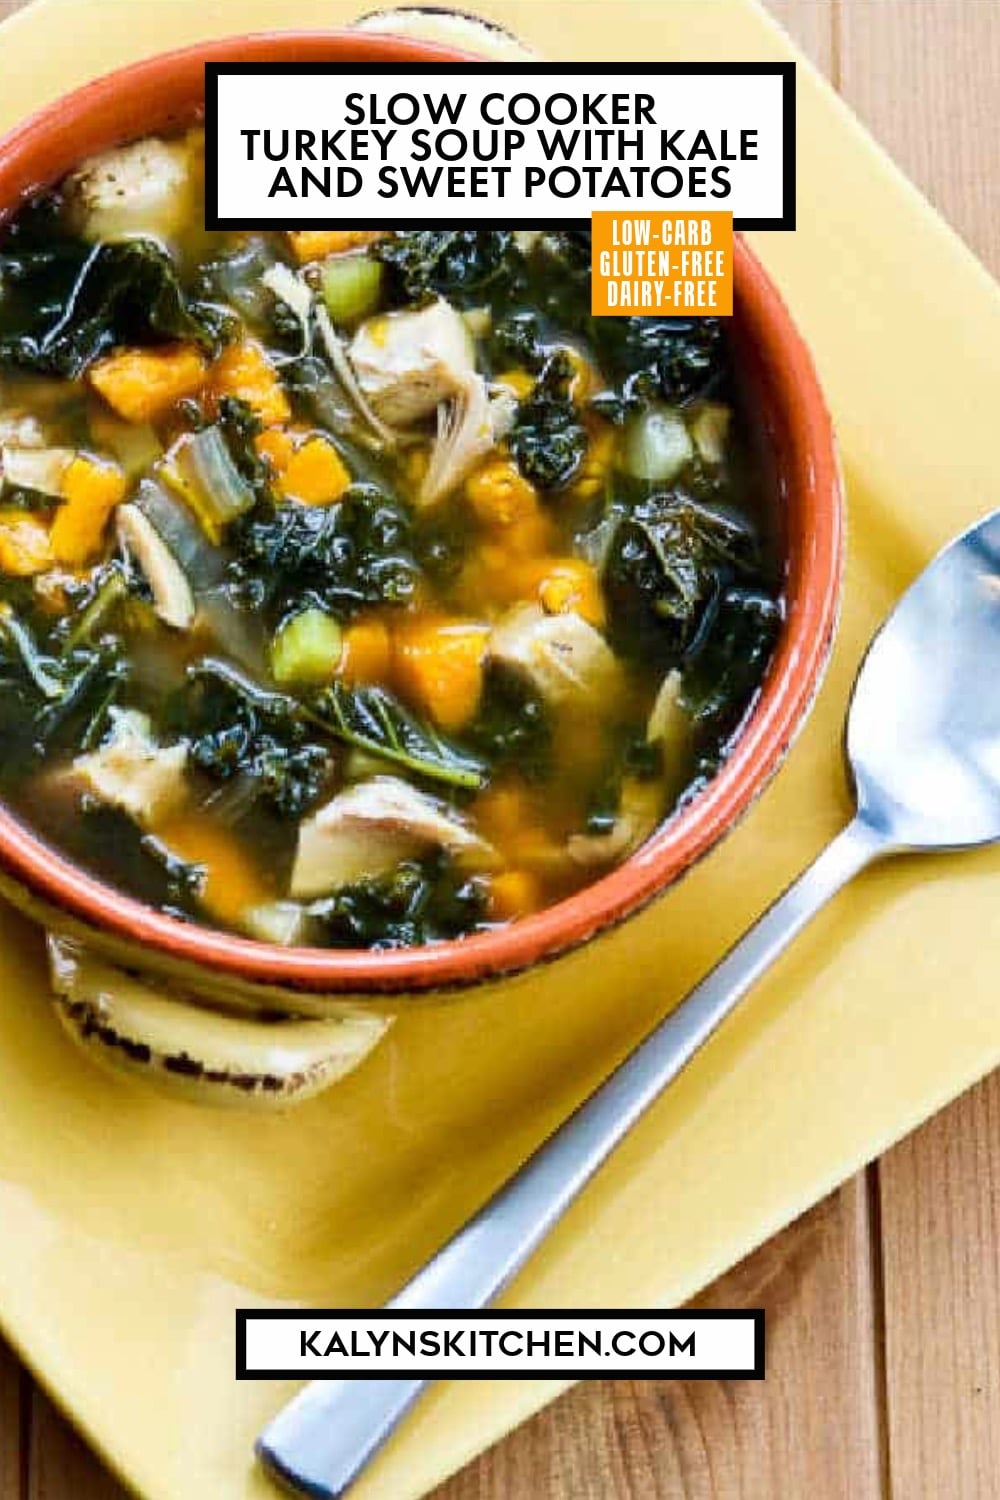 Pinterest image of Slow Cooker Turkey Soup with Kale and Sweet Potatoes